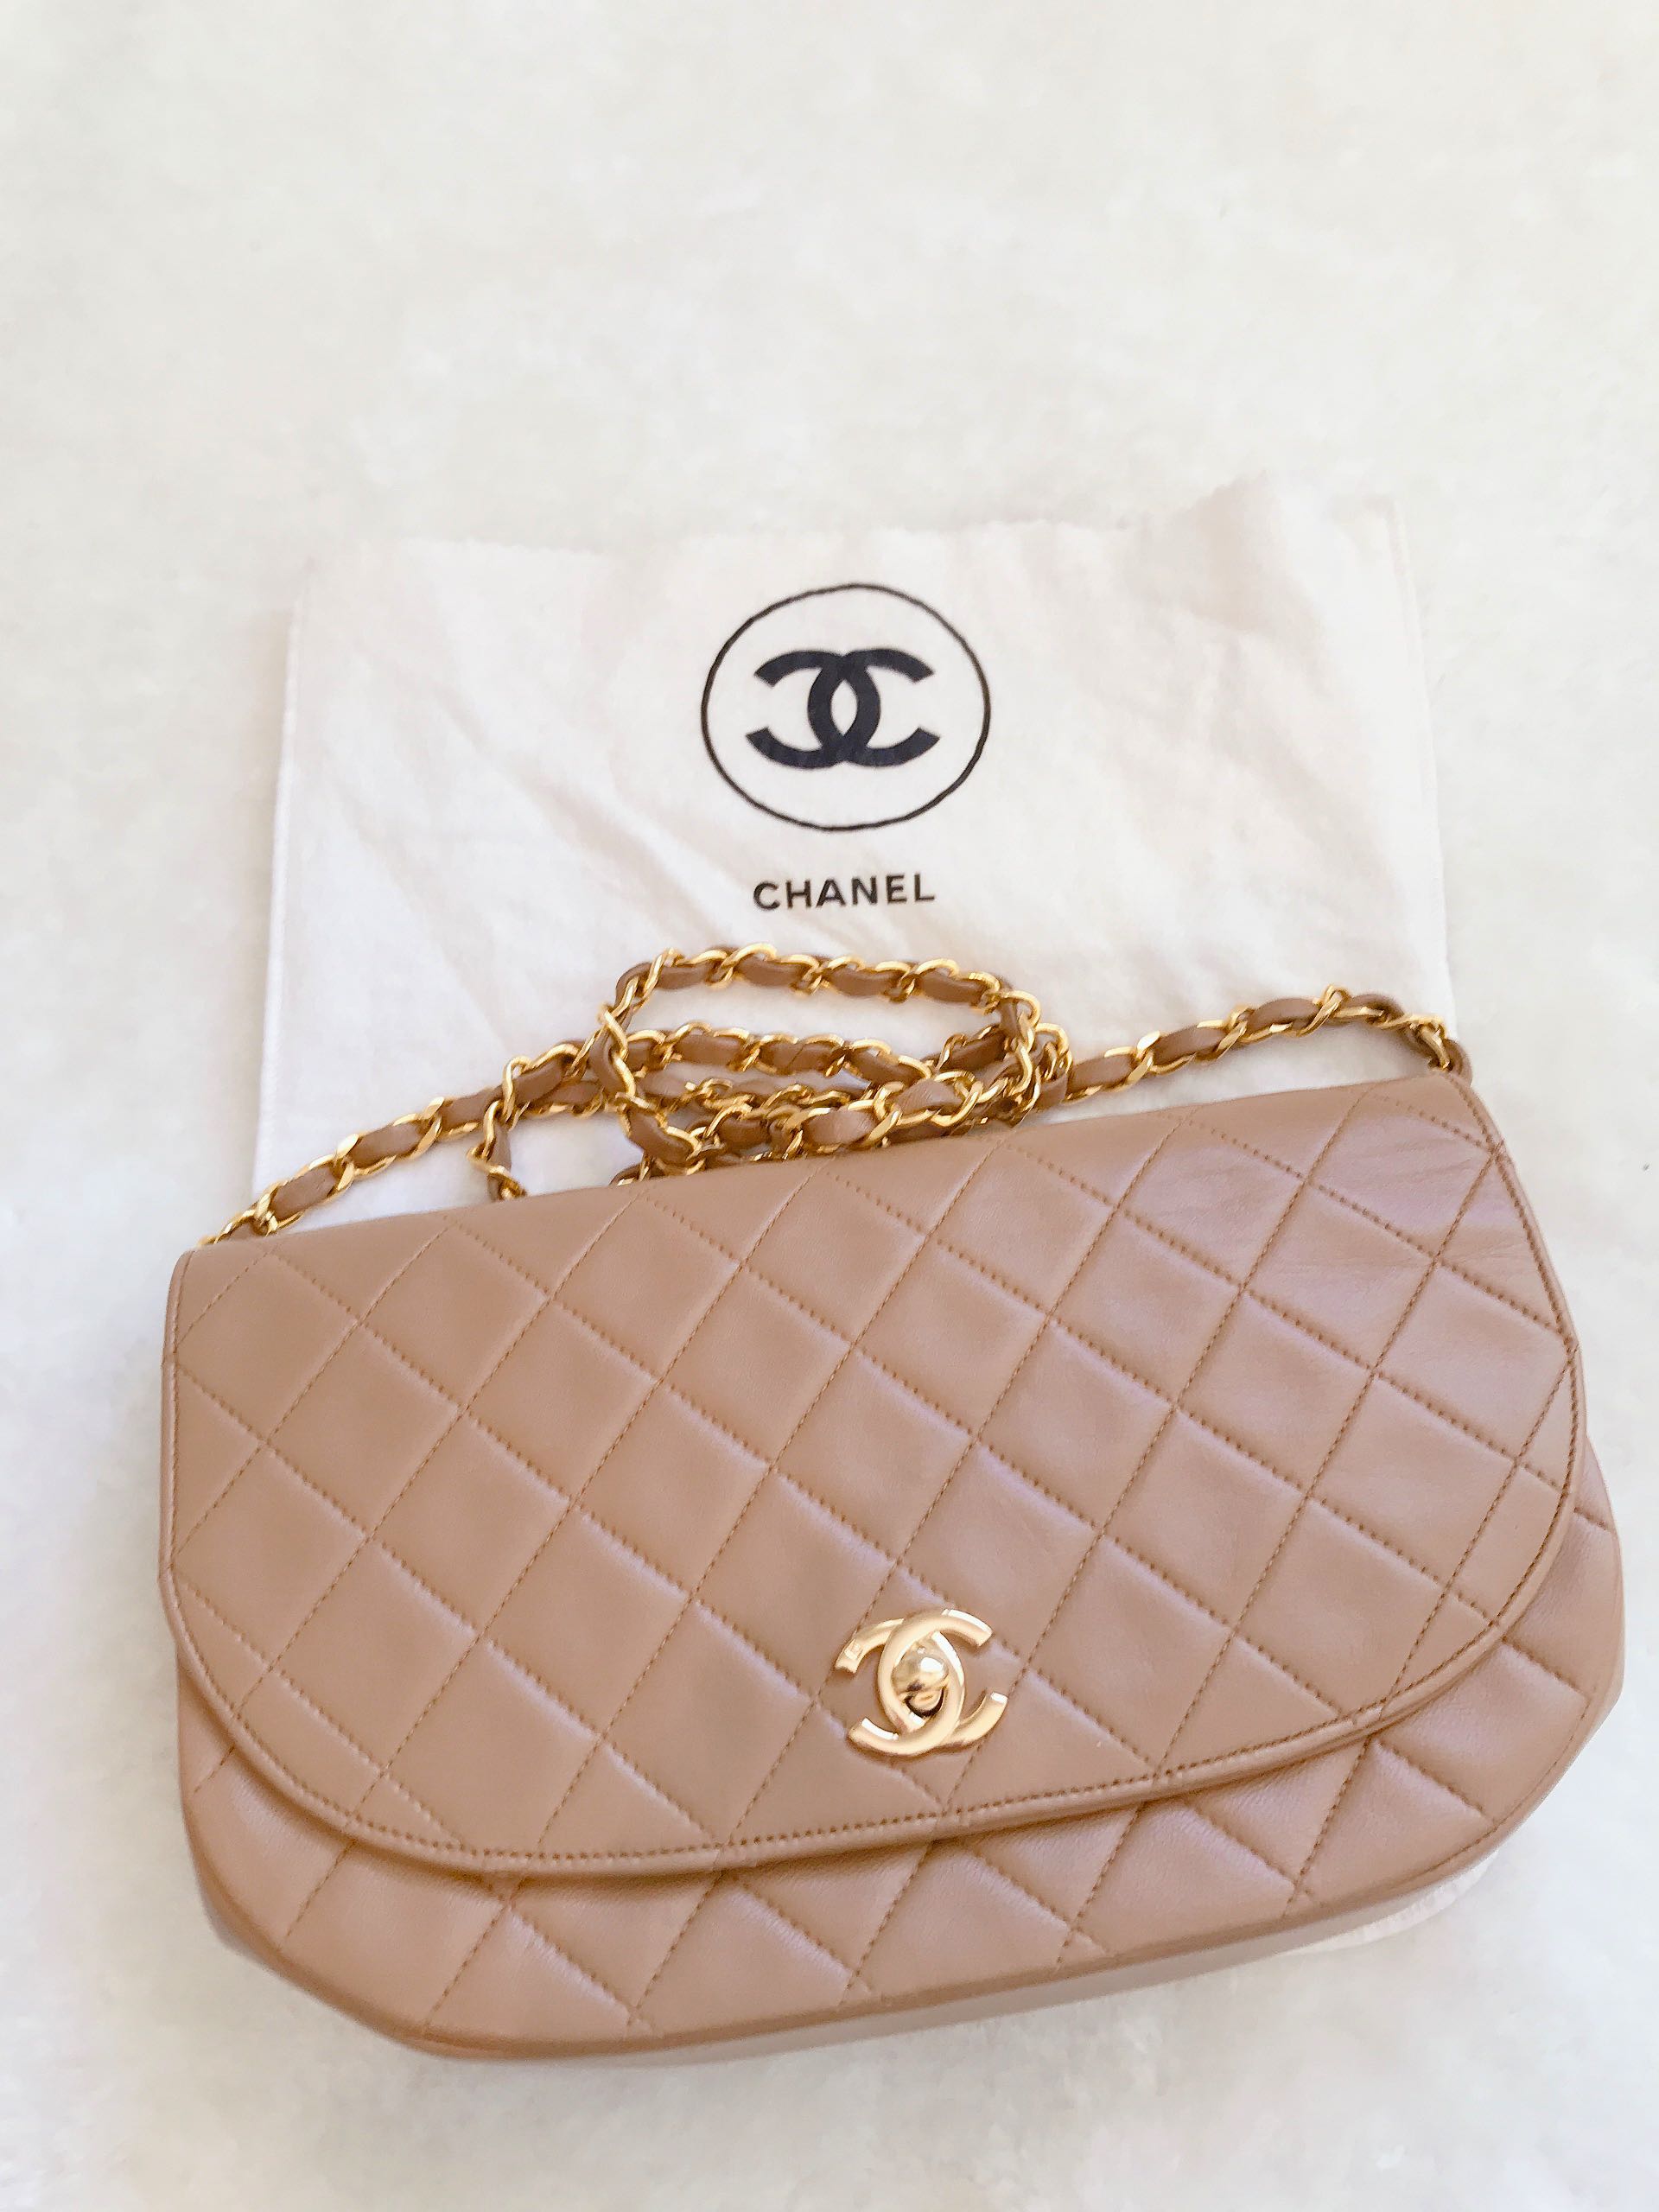 Top 10 Rare Chanel Bags  The Absolute Best Chanel Has to Offer  YouTube